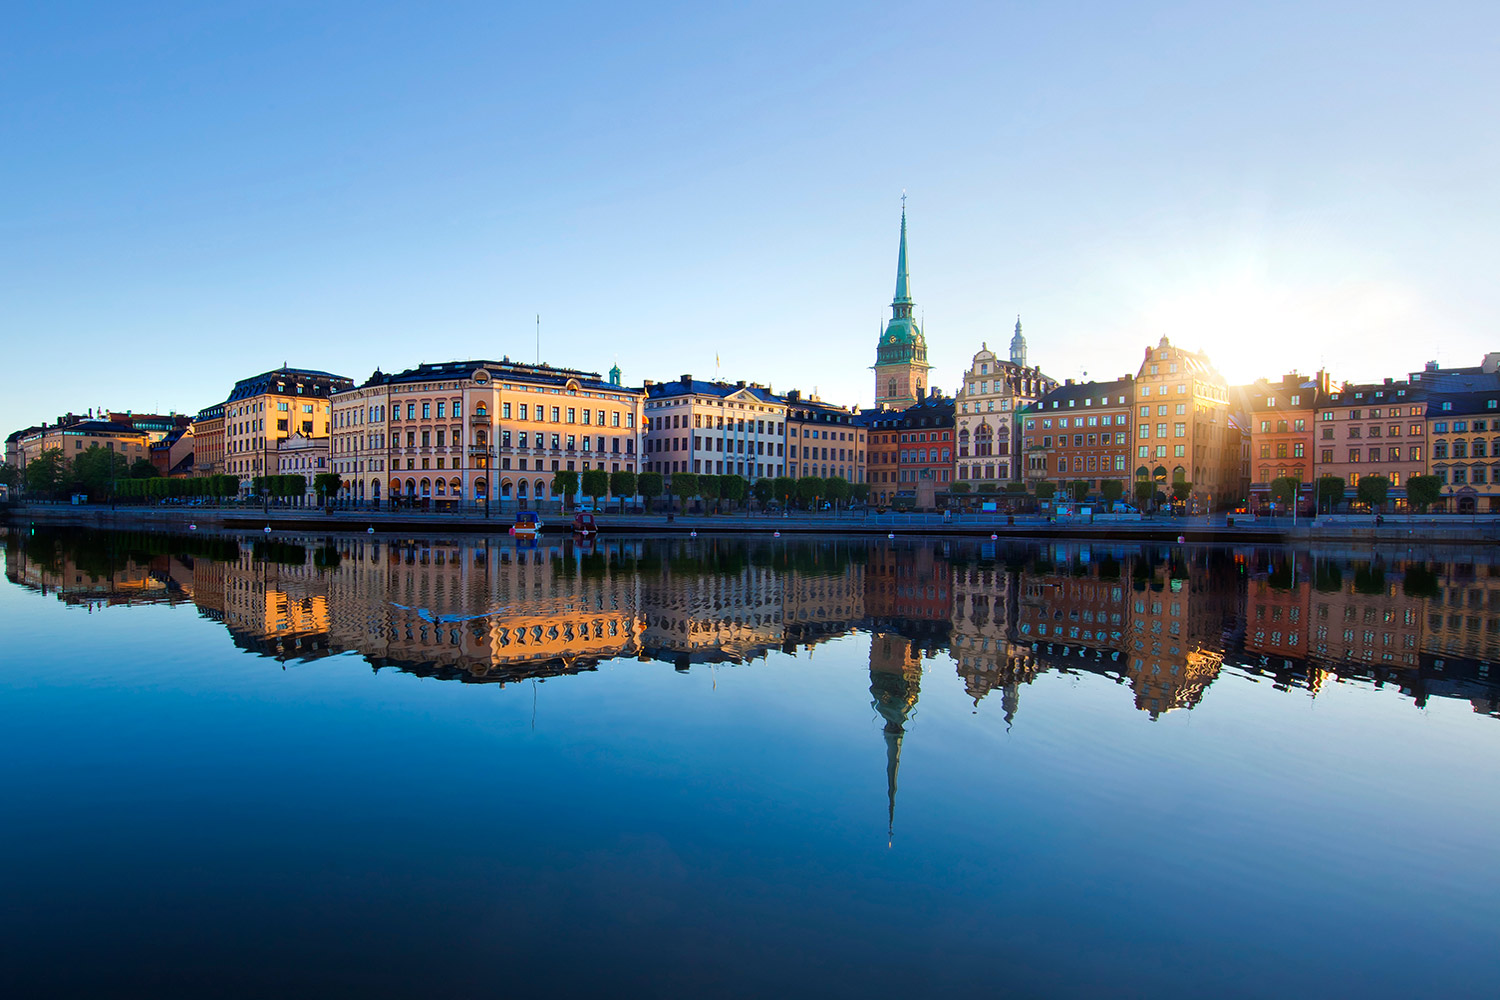 Stockholm's beautiful Old Town at sunrise, reflected in the Riddarfjärden waters.